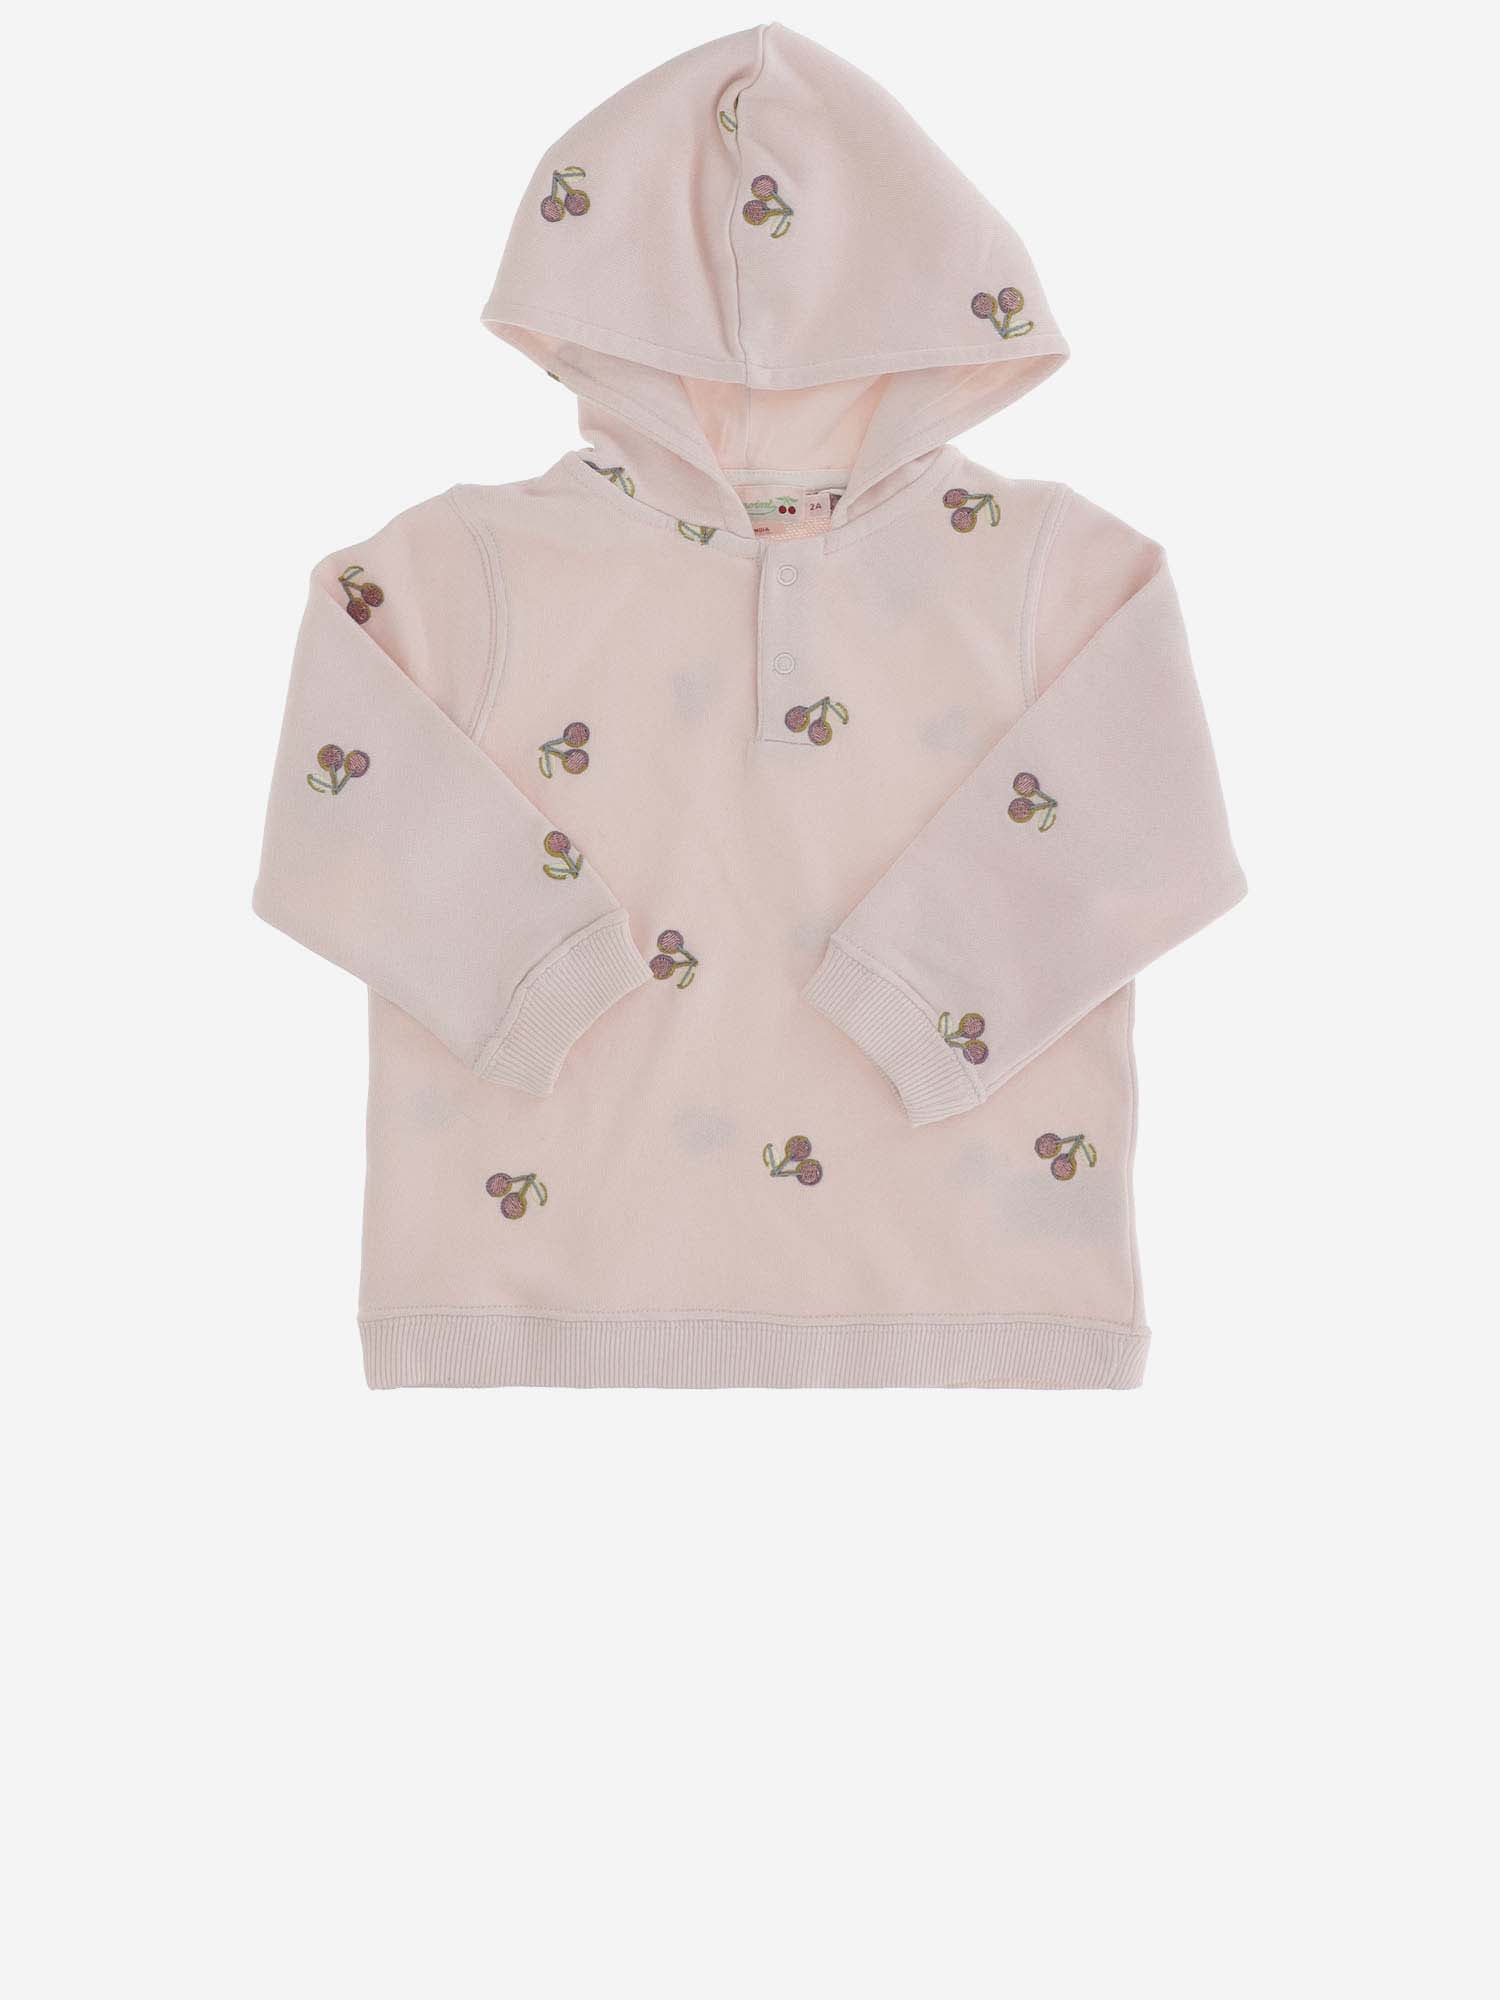 Bonpoint Kids' Cotton Hoodie With Cherries In Pink